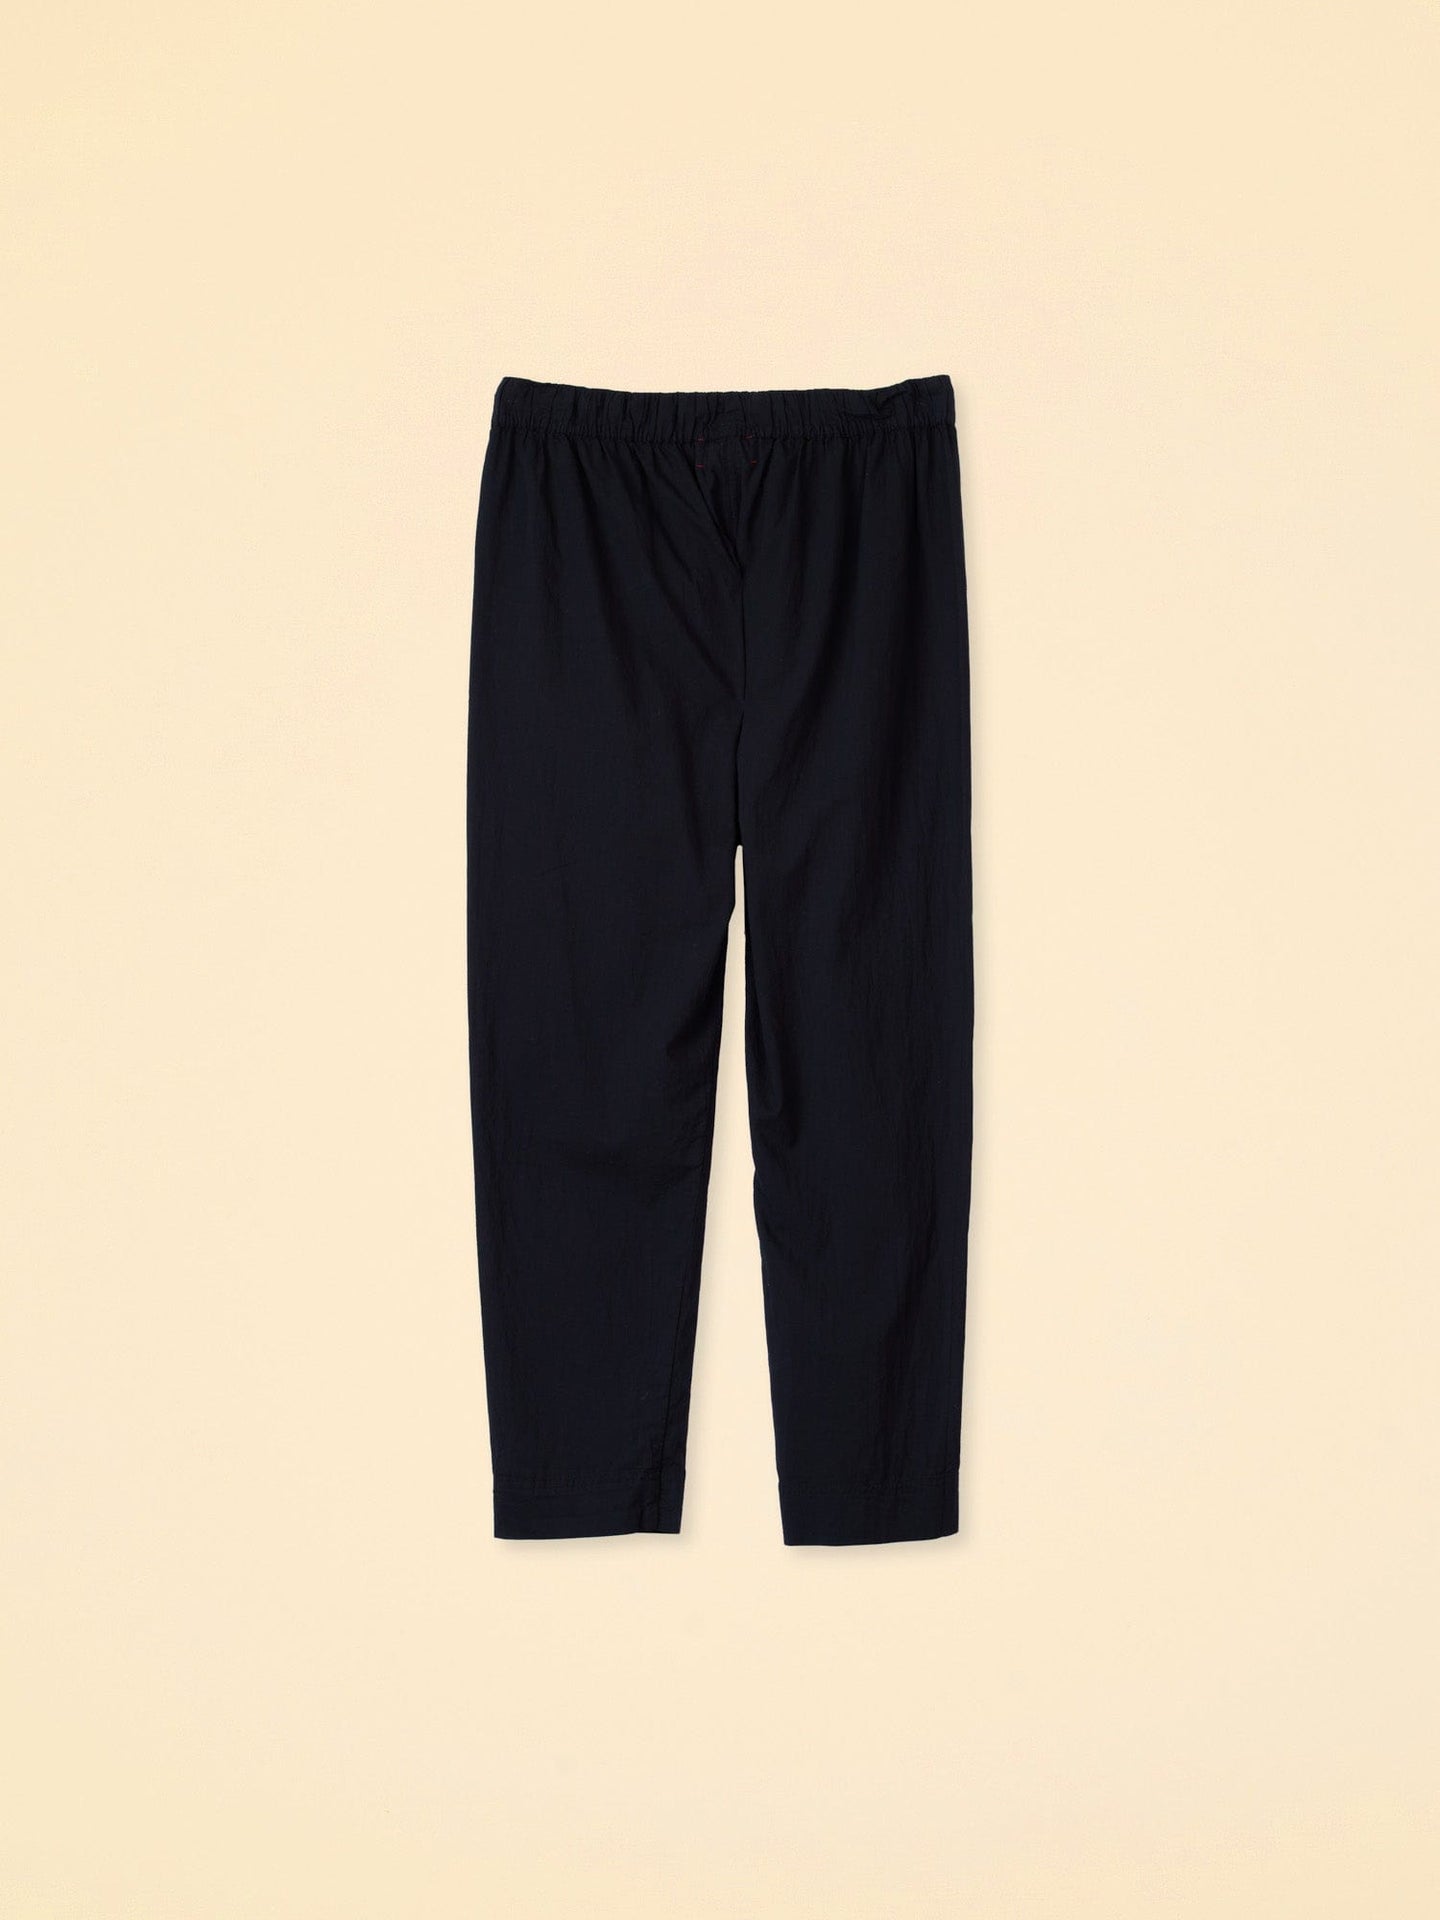 Xirena Draper Pant available from Weekends Boulder